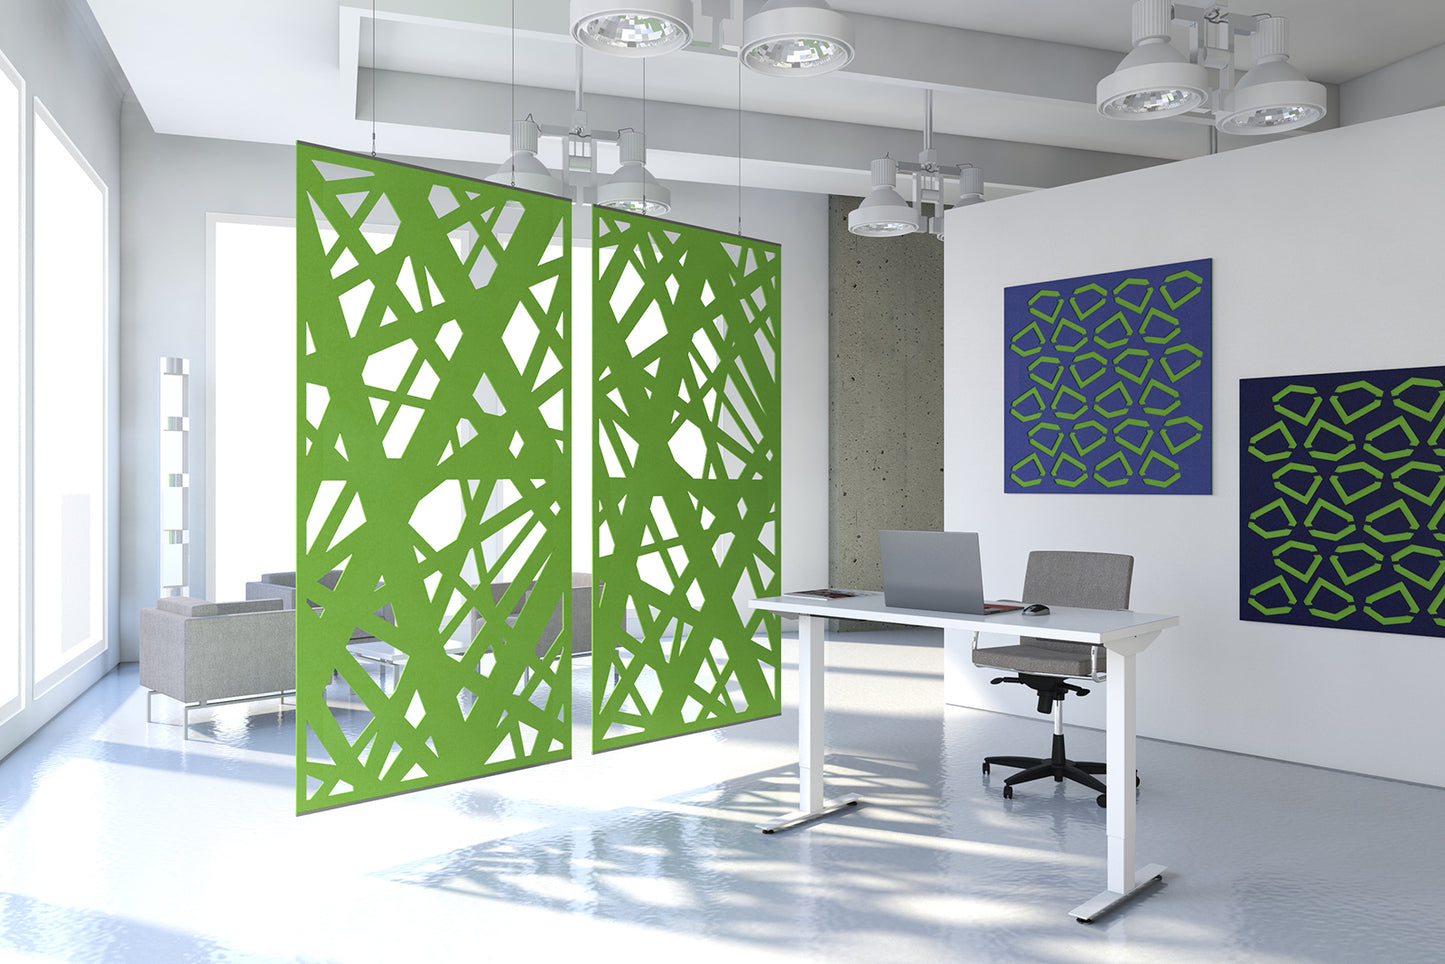 Echodeco 90% Attractive Acoustical Wall Panel Divider 47"w x 47"h